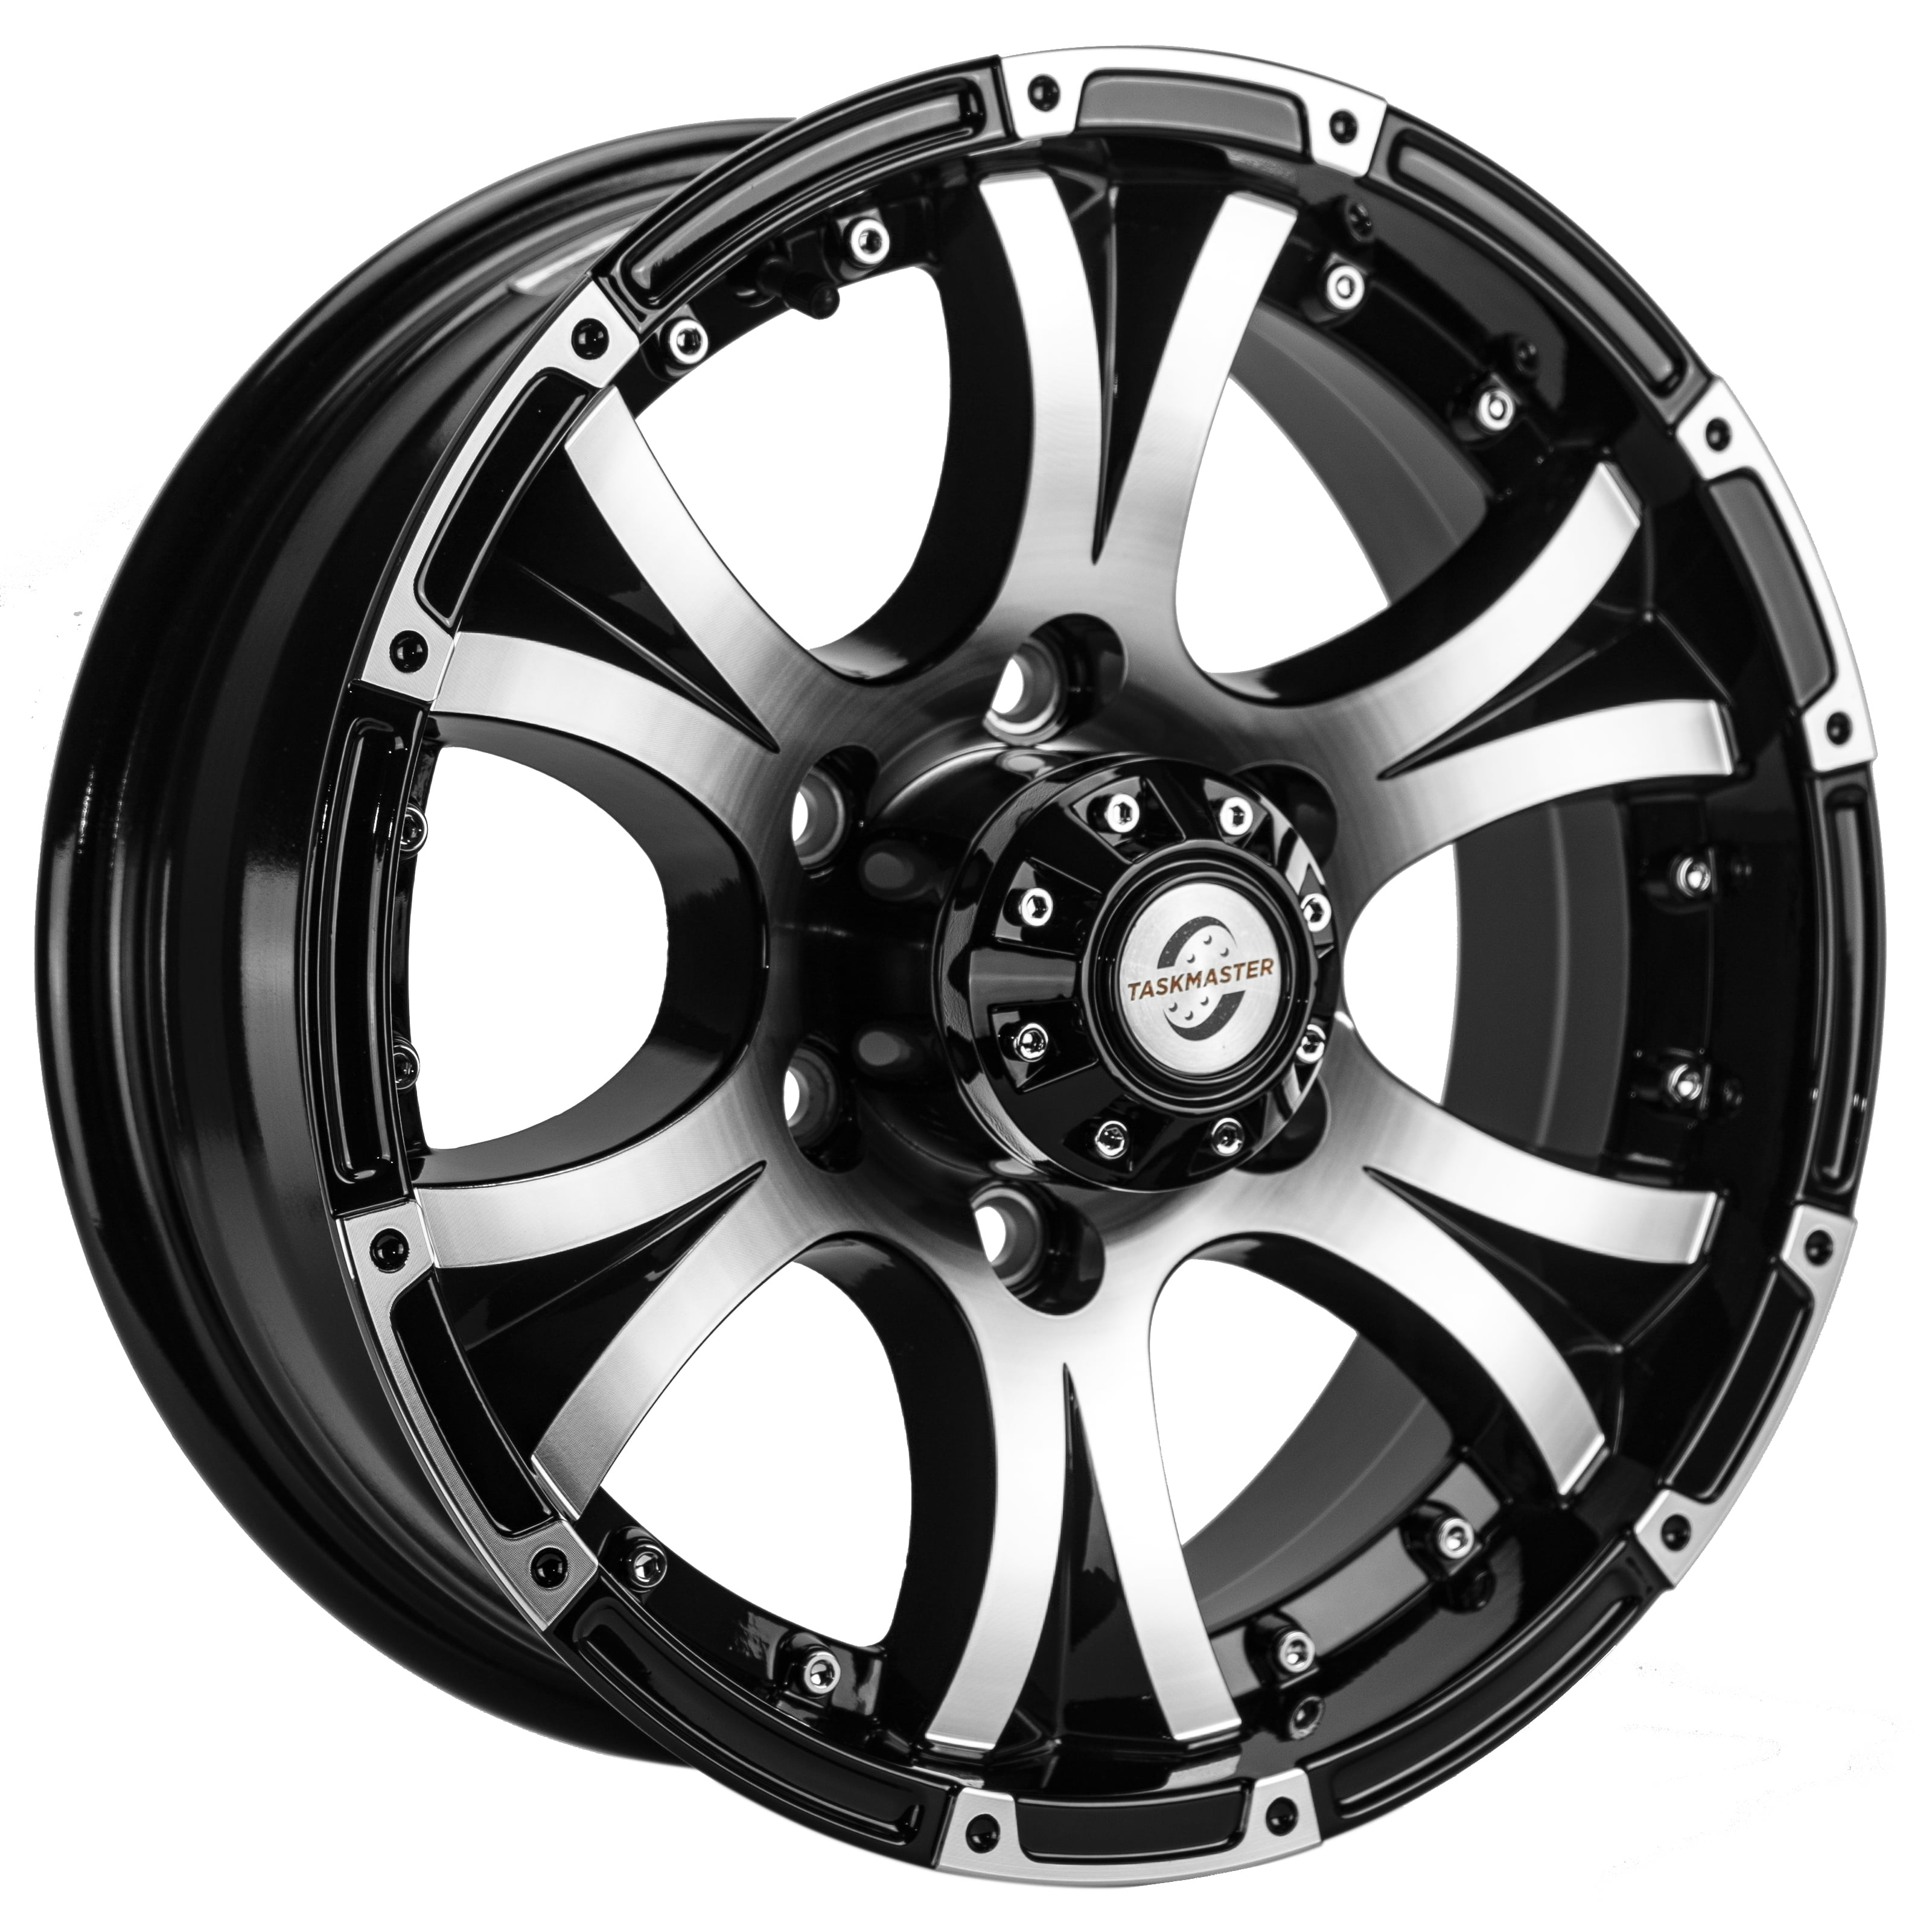 Viking Series Matte Black Machined Face & Lip Aluminum Trailer Wheel with Cap 0 Offset-Trailer Use Only 2830 LB Load Carrying Capacity 15 x 6 6 On 5.5-4.25 CB 